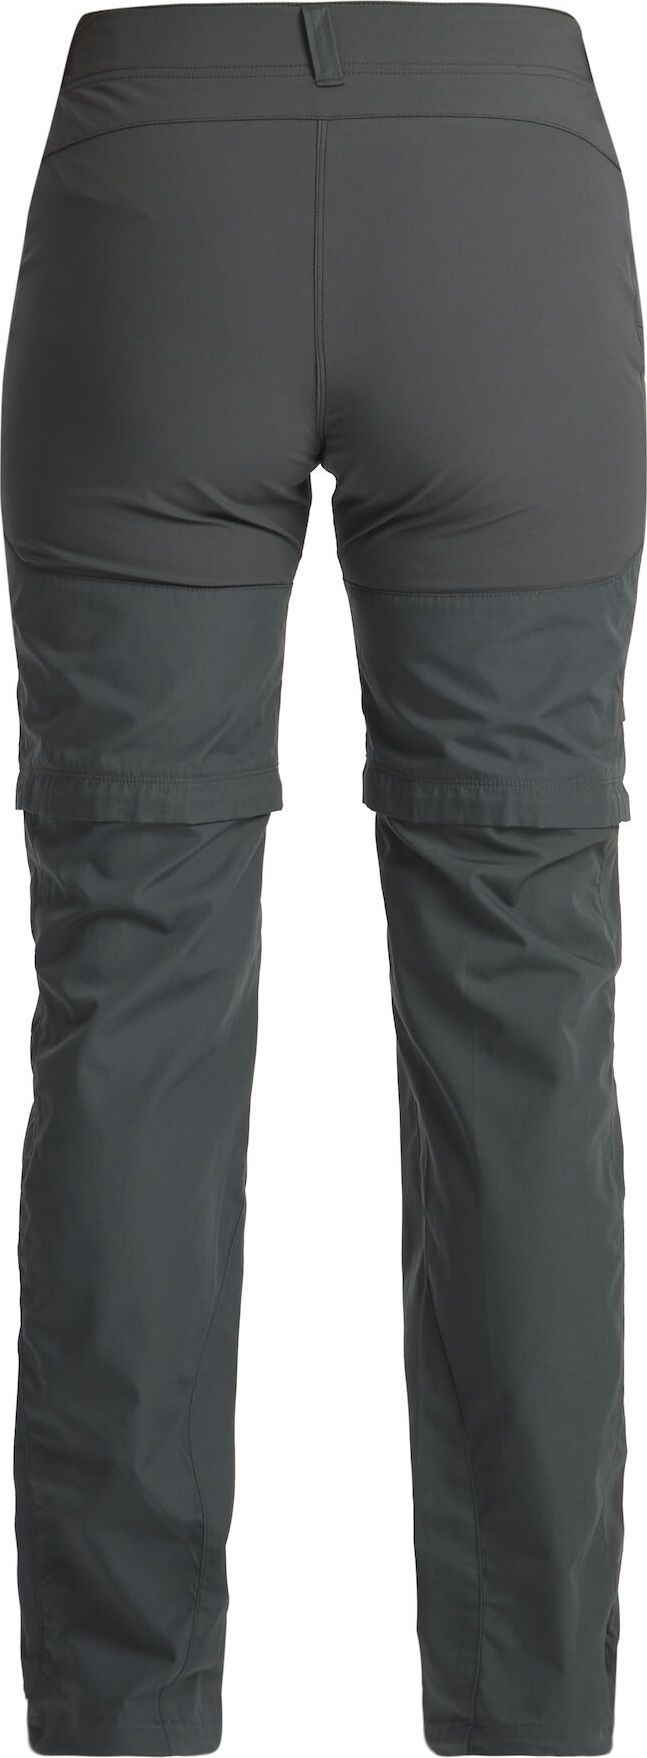 Women's Tived Zip-Off Pant  Dark Agave/Seaweed Lundhags